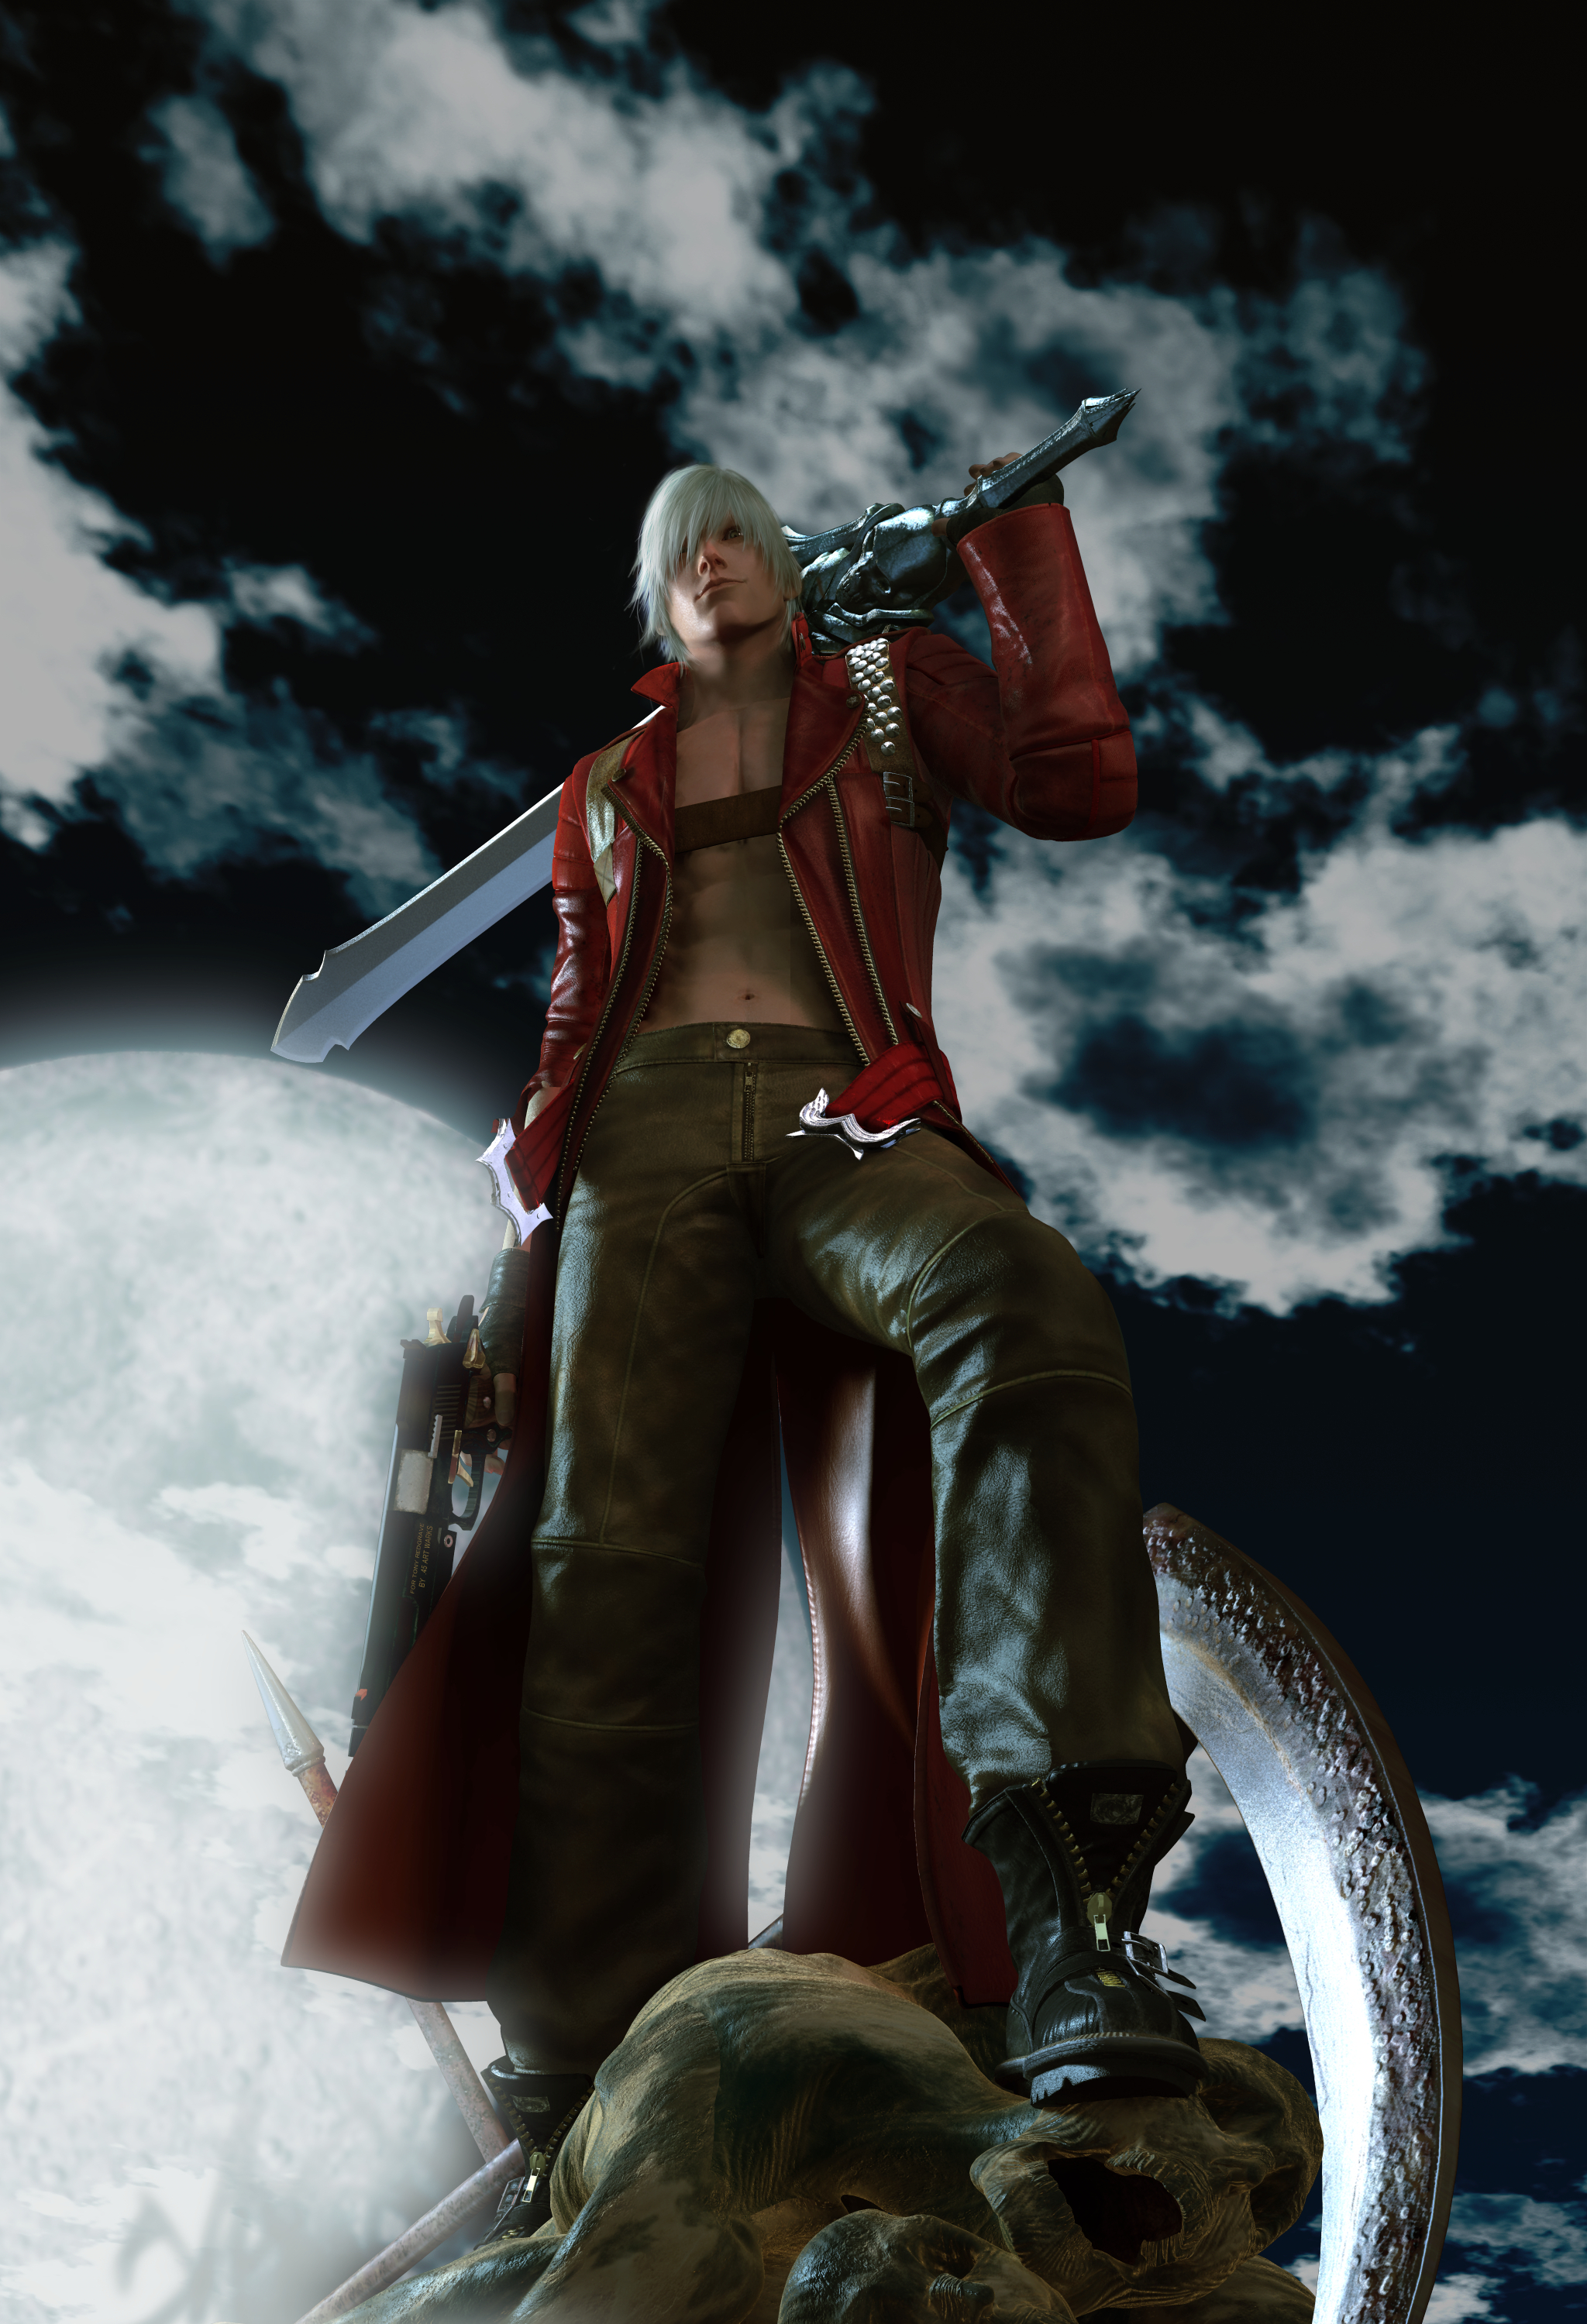 Devil May Cry 3 Wallpaper Hd Games 4k Wallpapers Images Photos And Background